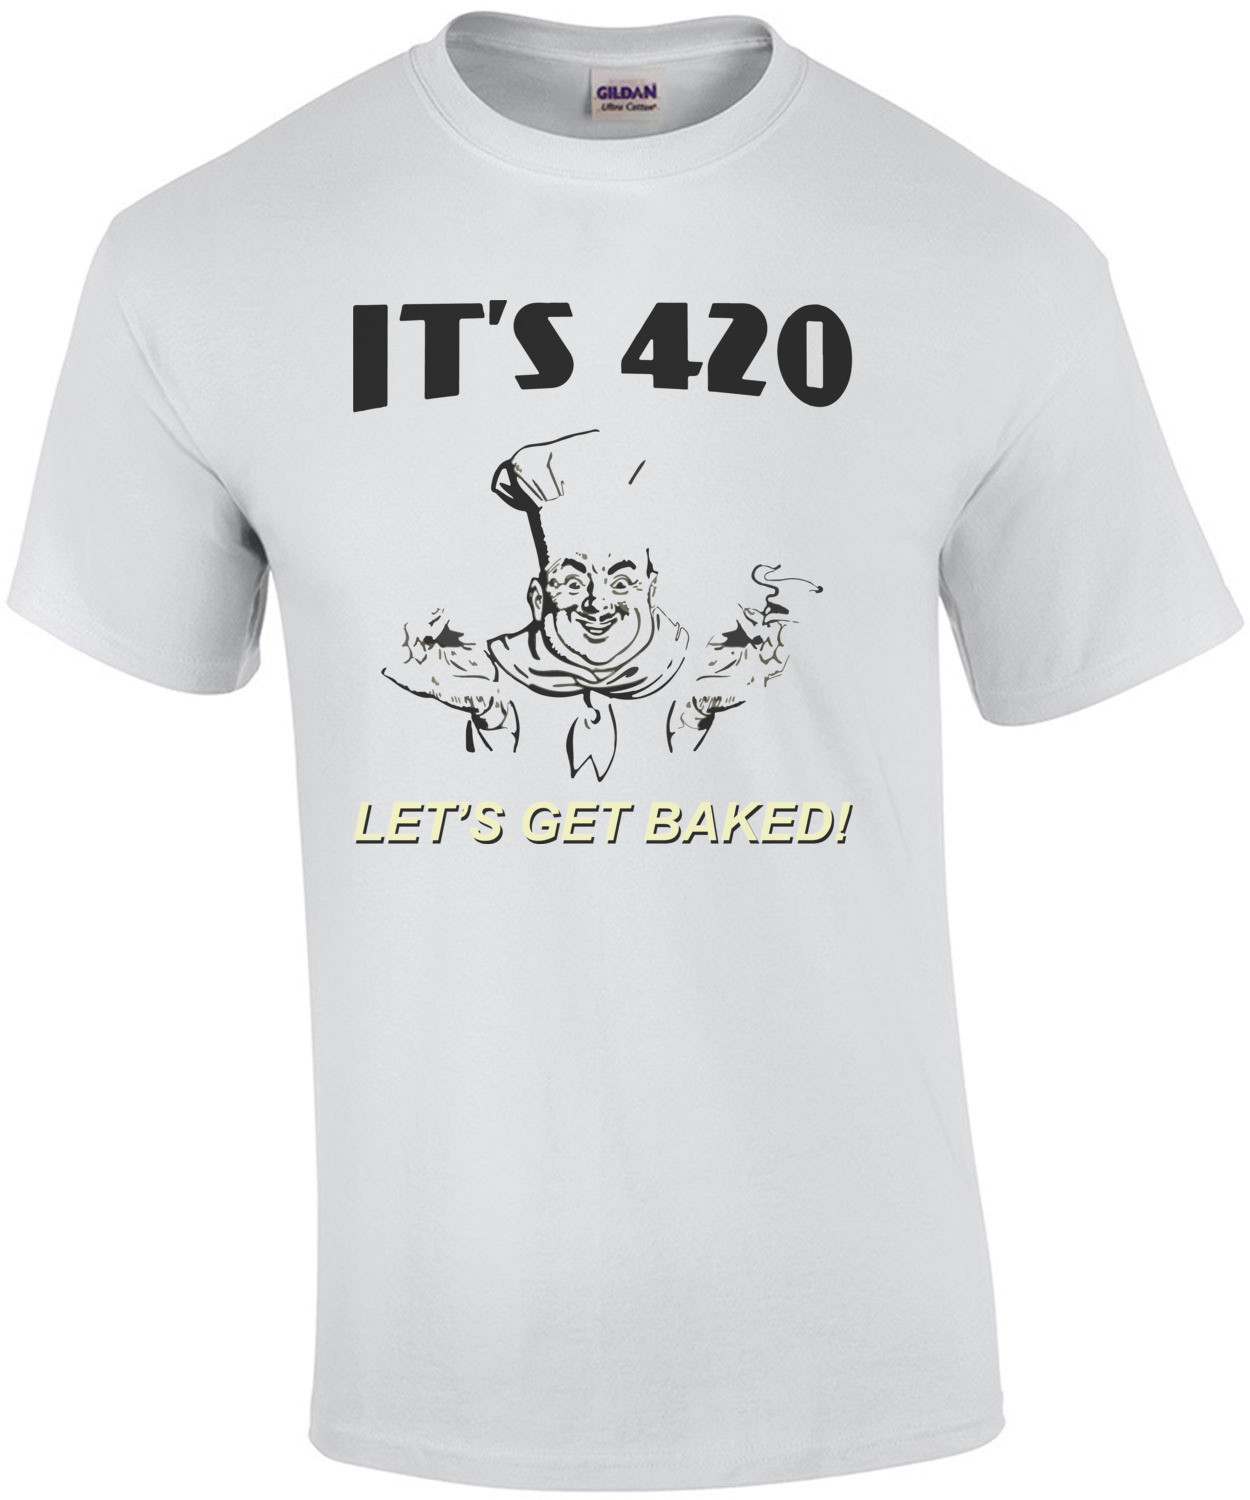 It's 420 Let's Get Baked T-Shirt